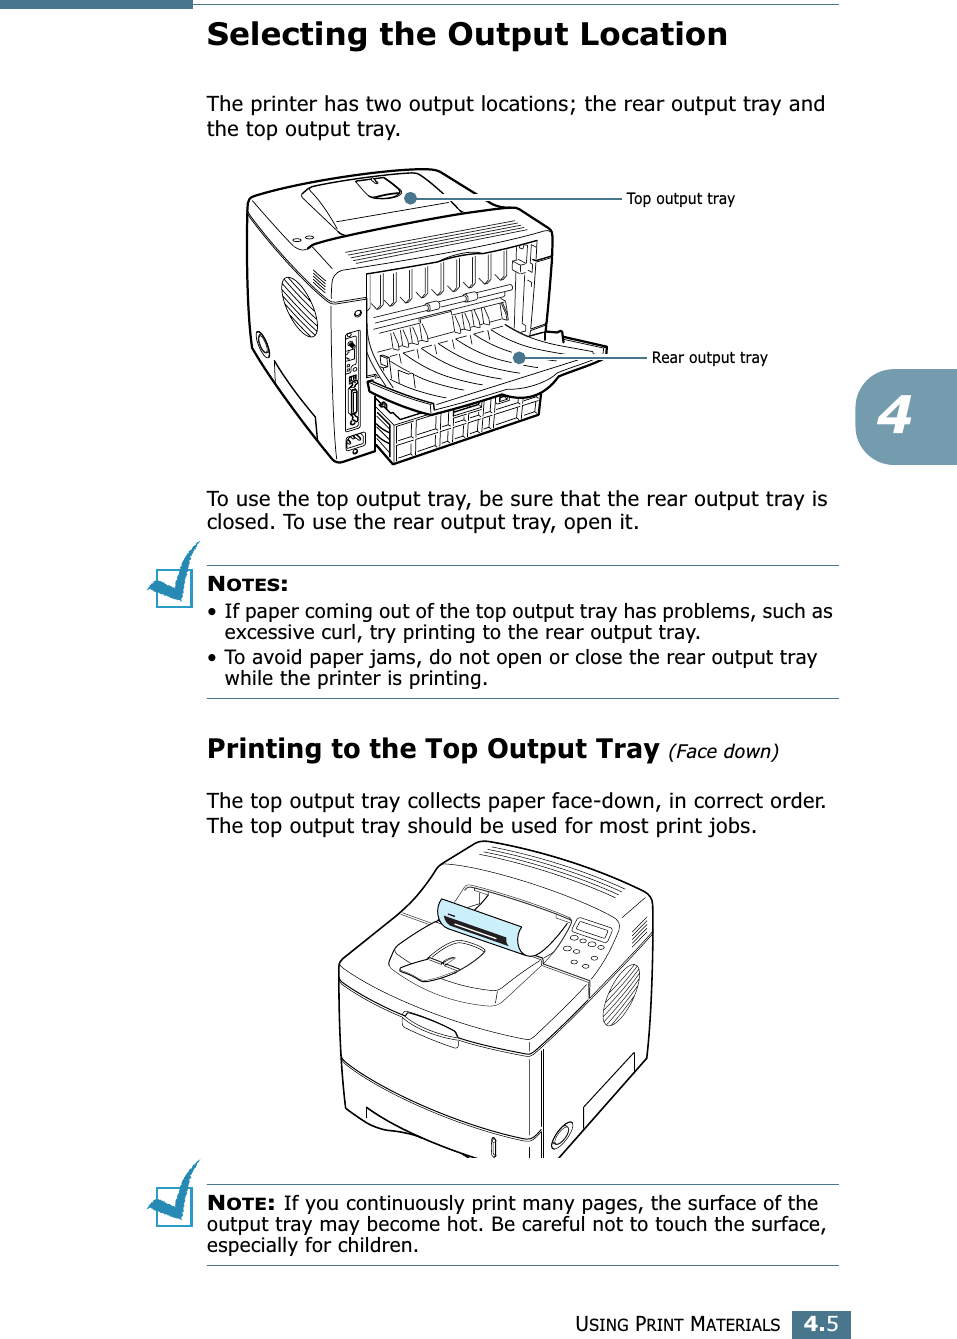 USING PRINT MATERIALS4.54Selecting the Output LocationThe printer has two output locations; the rear output tray and the top output tray. To use the top output tray, be sure that the rear output tray is closed. To use the rear output tray, open it.NOTES:• If paper coming out of the top output tray has problems, such as excessive curl, try printing to the rear output tray.• To avoid paper jams, do not open or close the rear output tray while the printer is printing.Printing to the Top Output Tray (Face down)The top output tray collects paper face-down, in correct order. The top output tray should be used for most print jobs.NOTE: If you continuously print many pages, the surface of the output tray may become hot. Be careful not to touch the surface, especially for children.Top output trayRear output tray